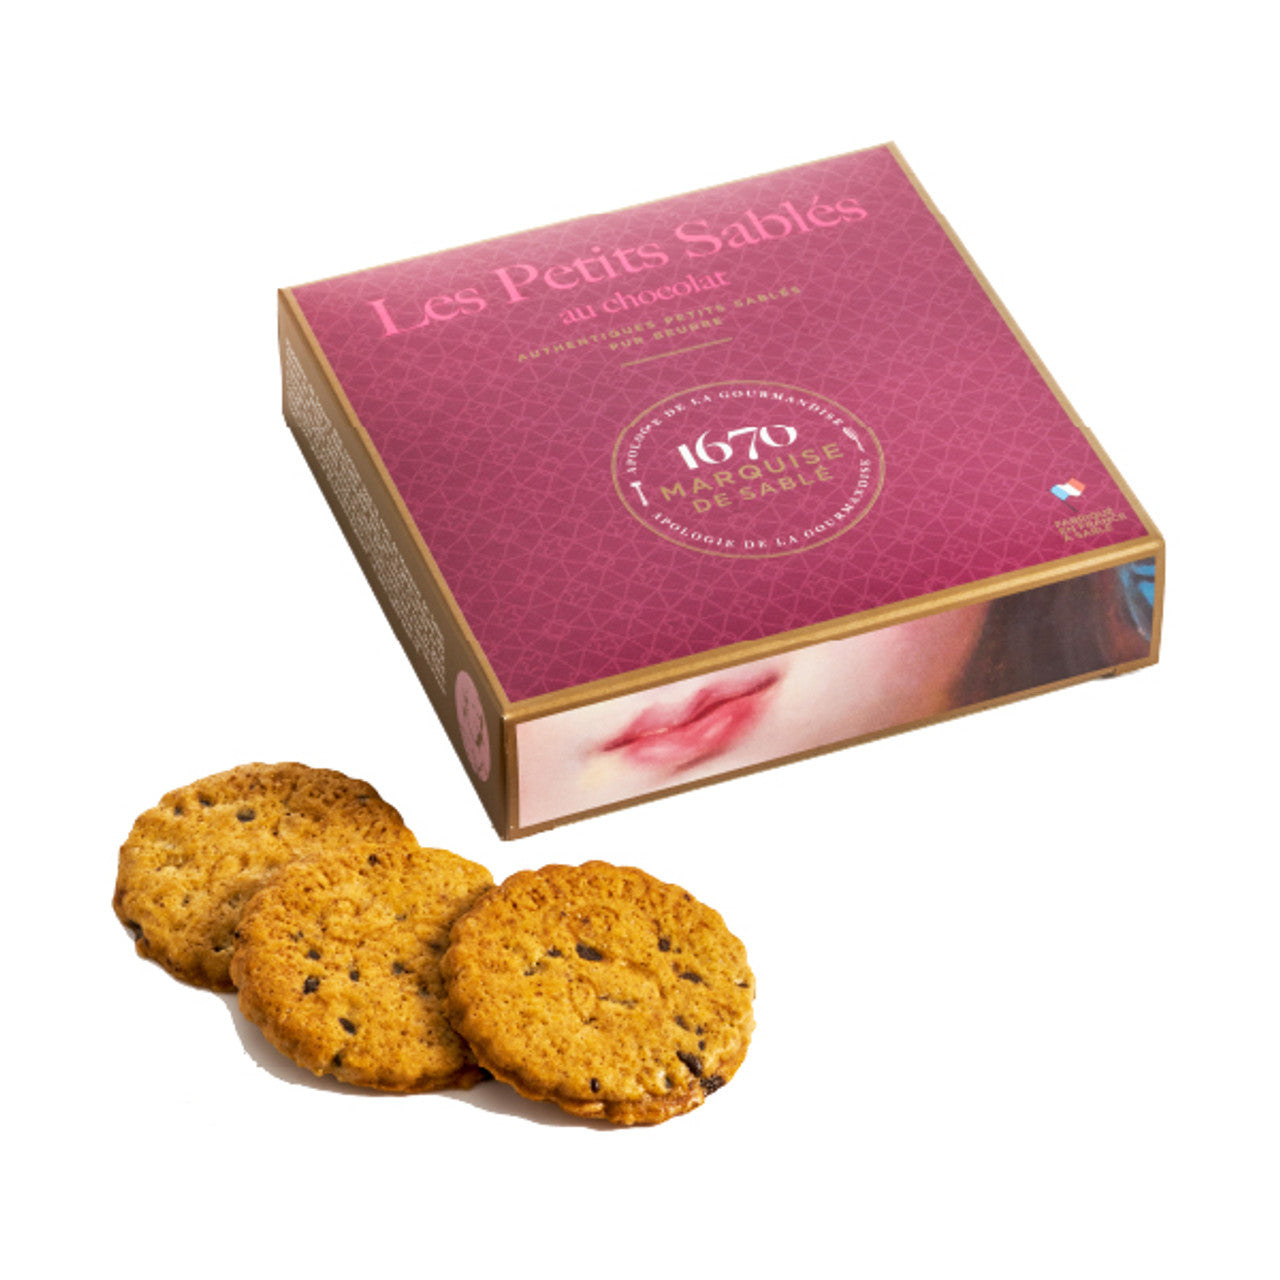 Shortbread Cookies with Chocolate Les Petits Sable (100gr)